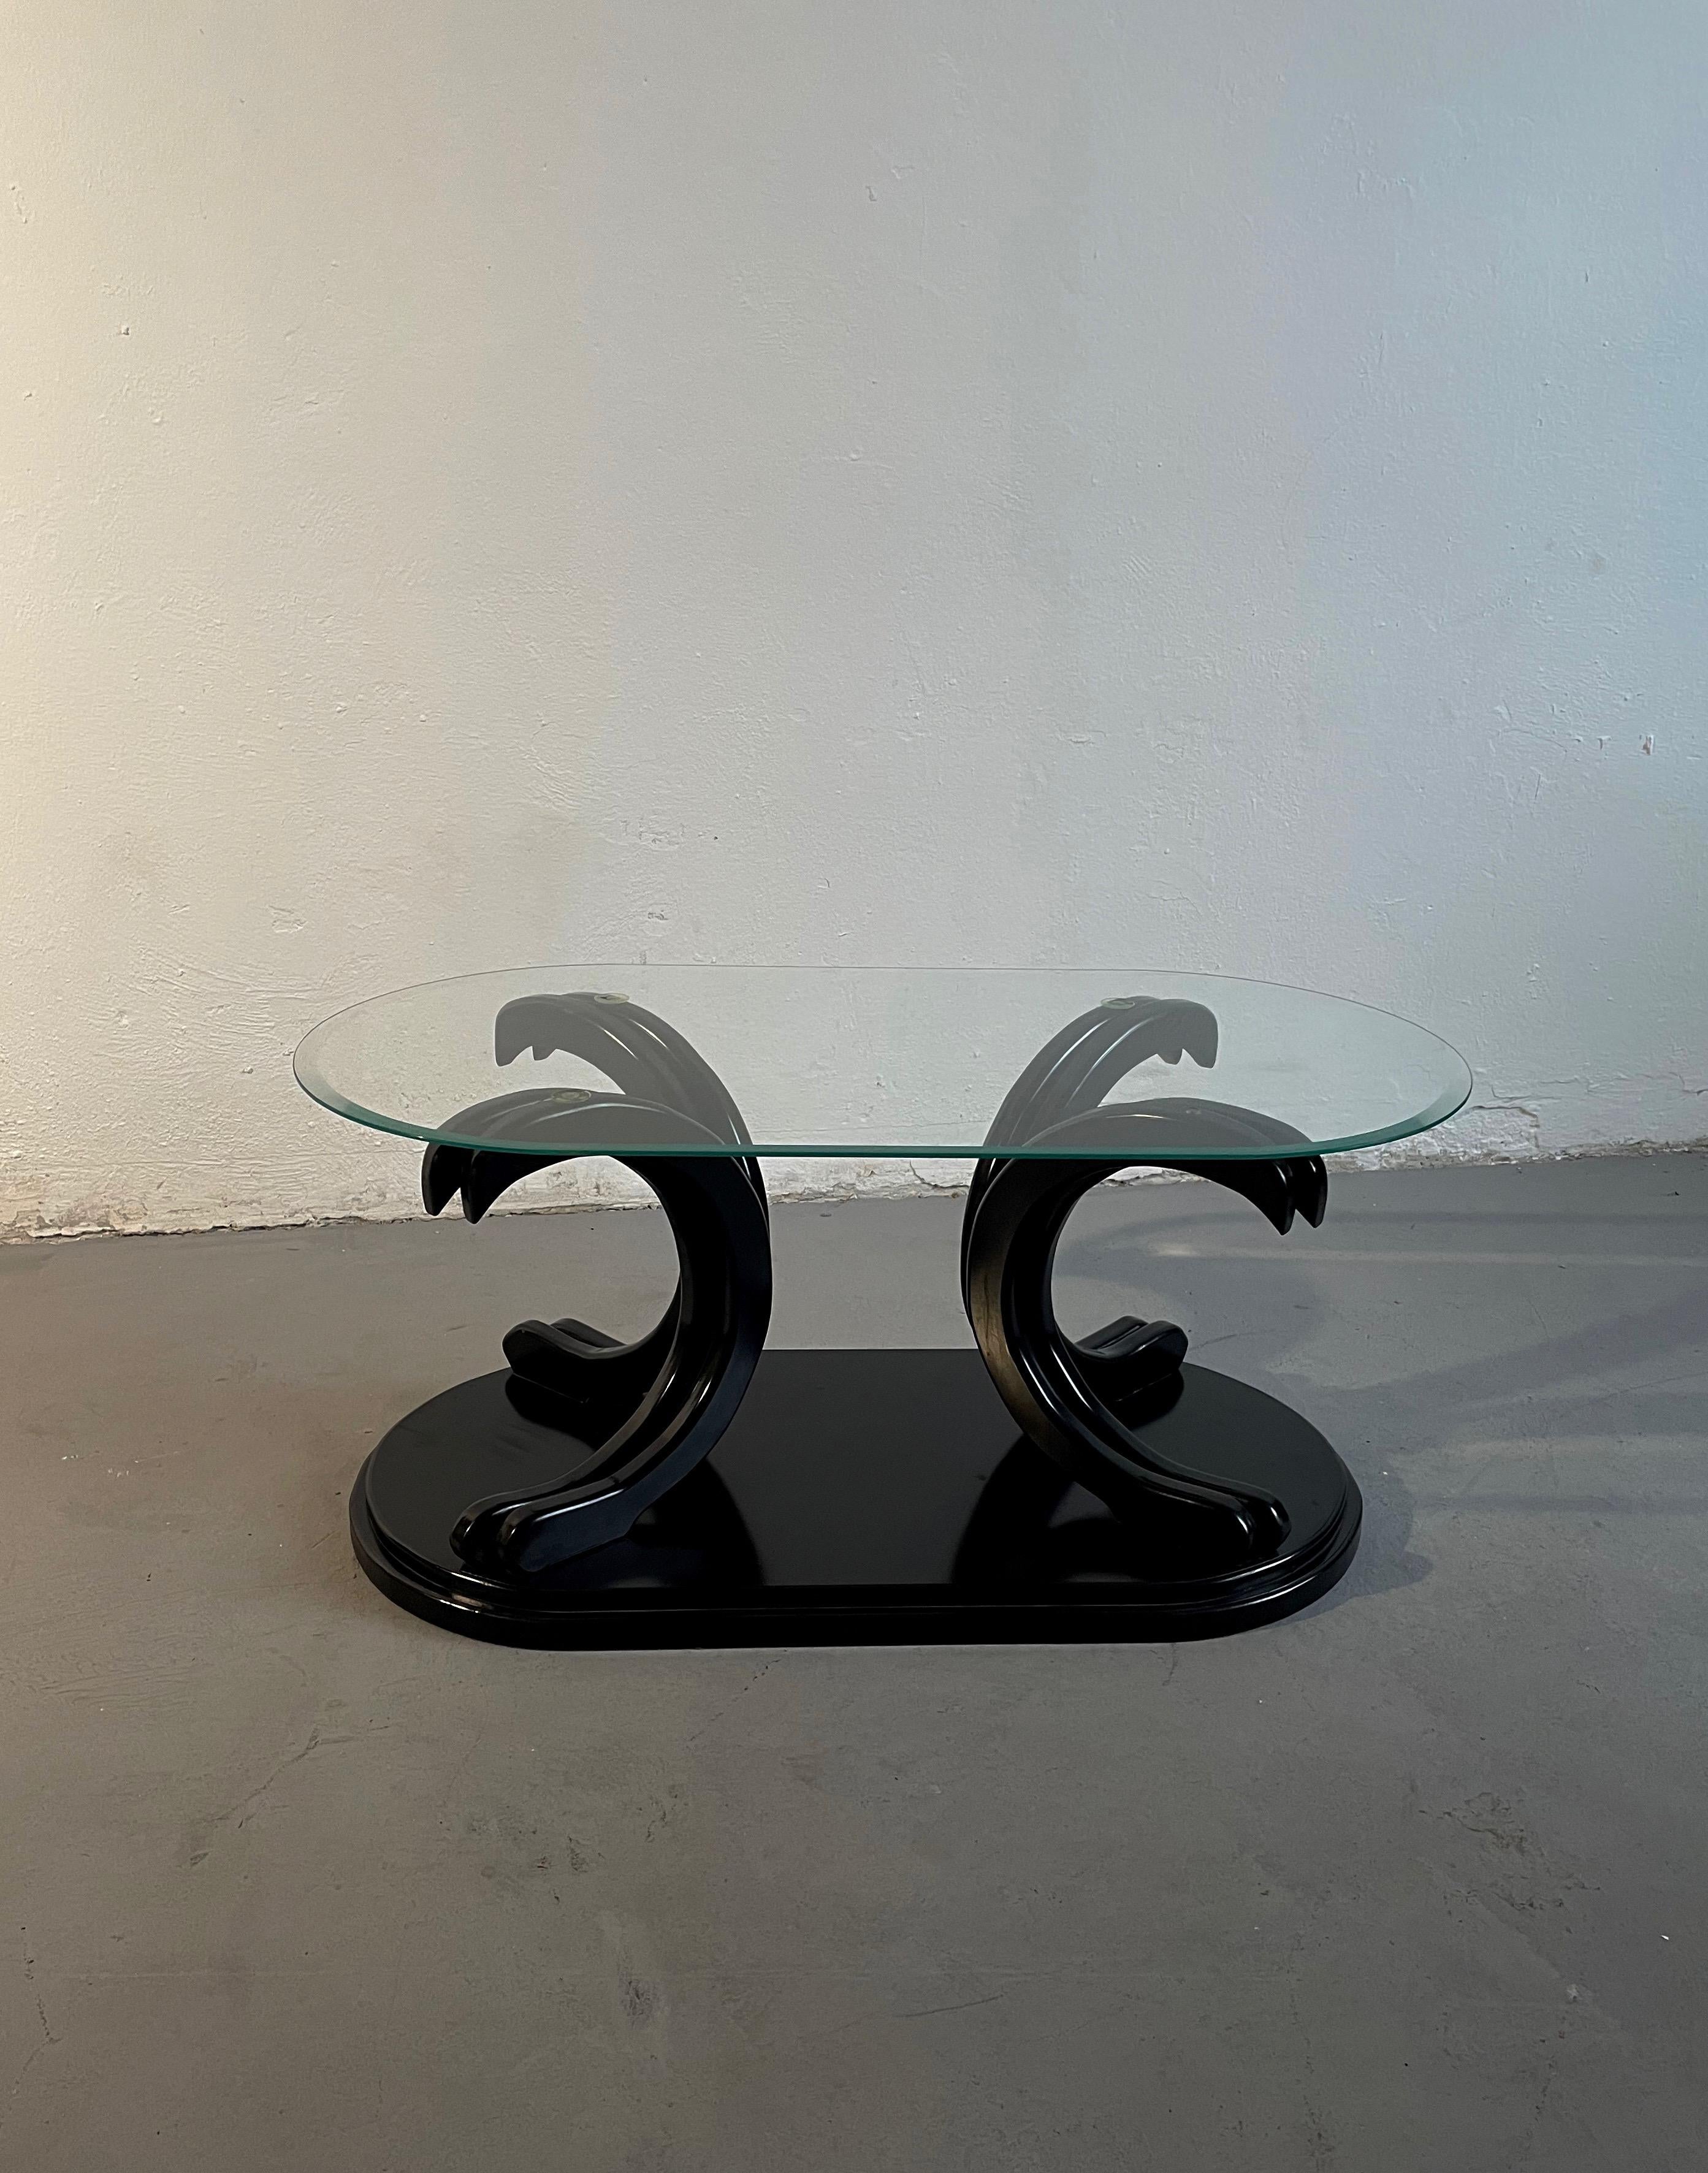 Italian coffee table produced in the 1980s.

The base is made of composite wood lacquered in black colour.

Table top is made of clear glass.

The table has some small tear and wear marks consistent with age and use. 

Total weight is 31 kg.